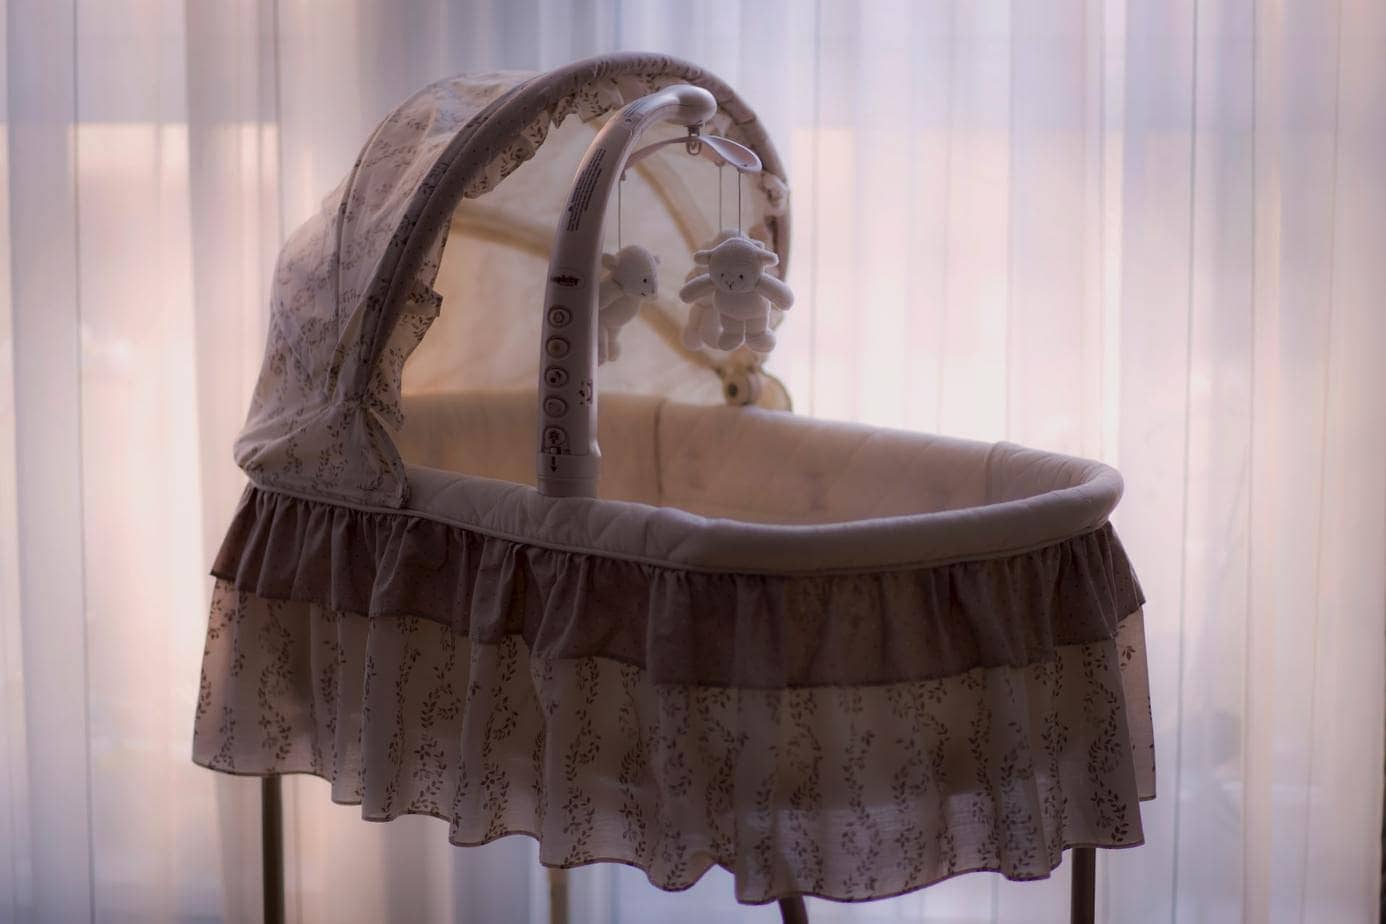 How to secure an infant crib?